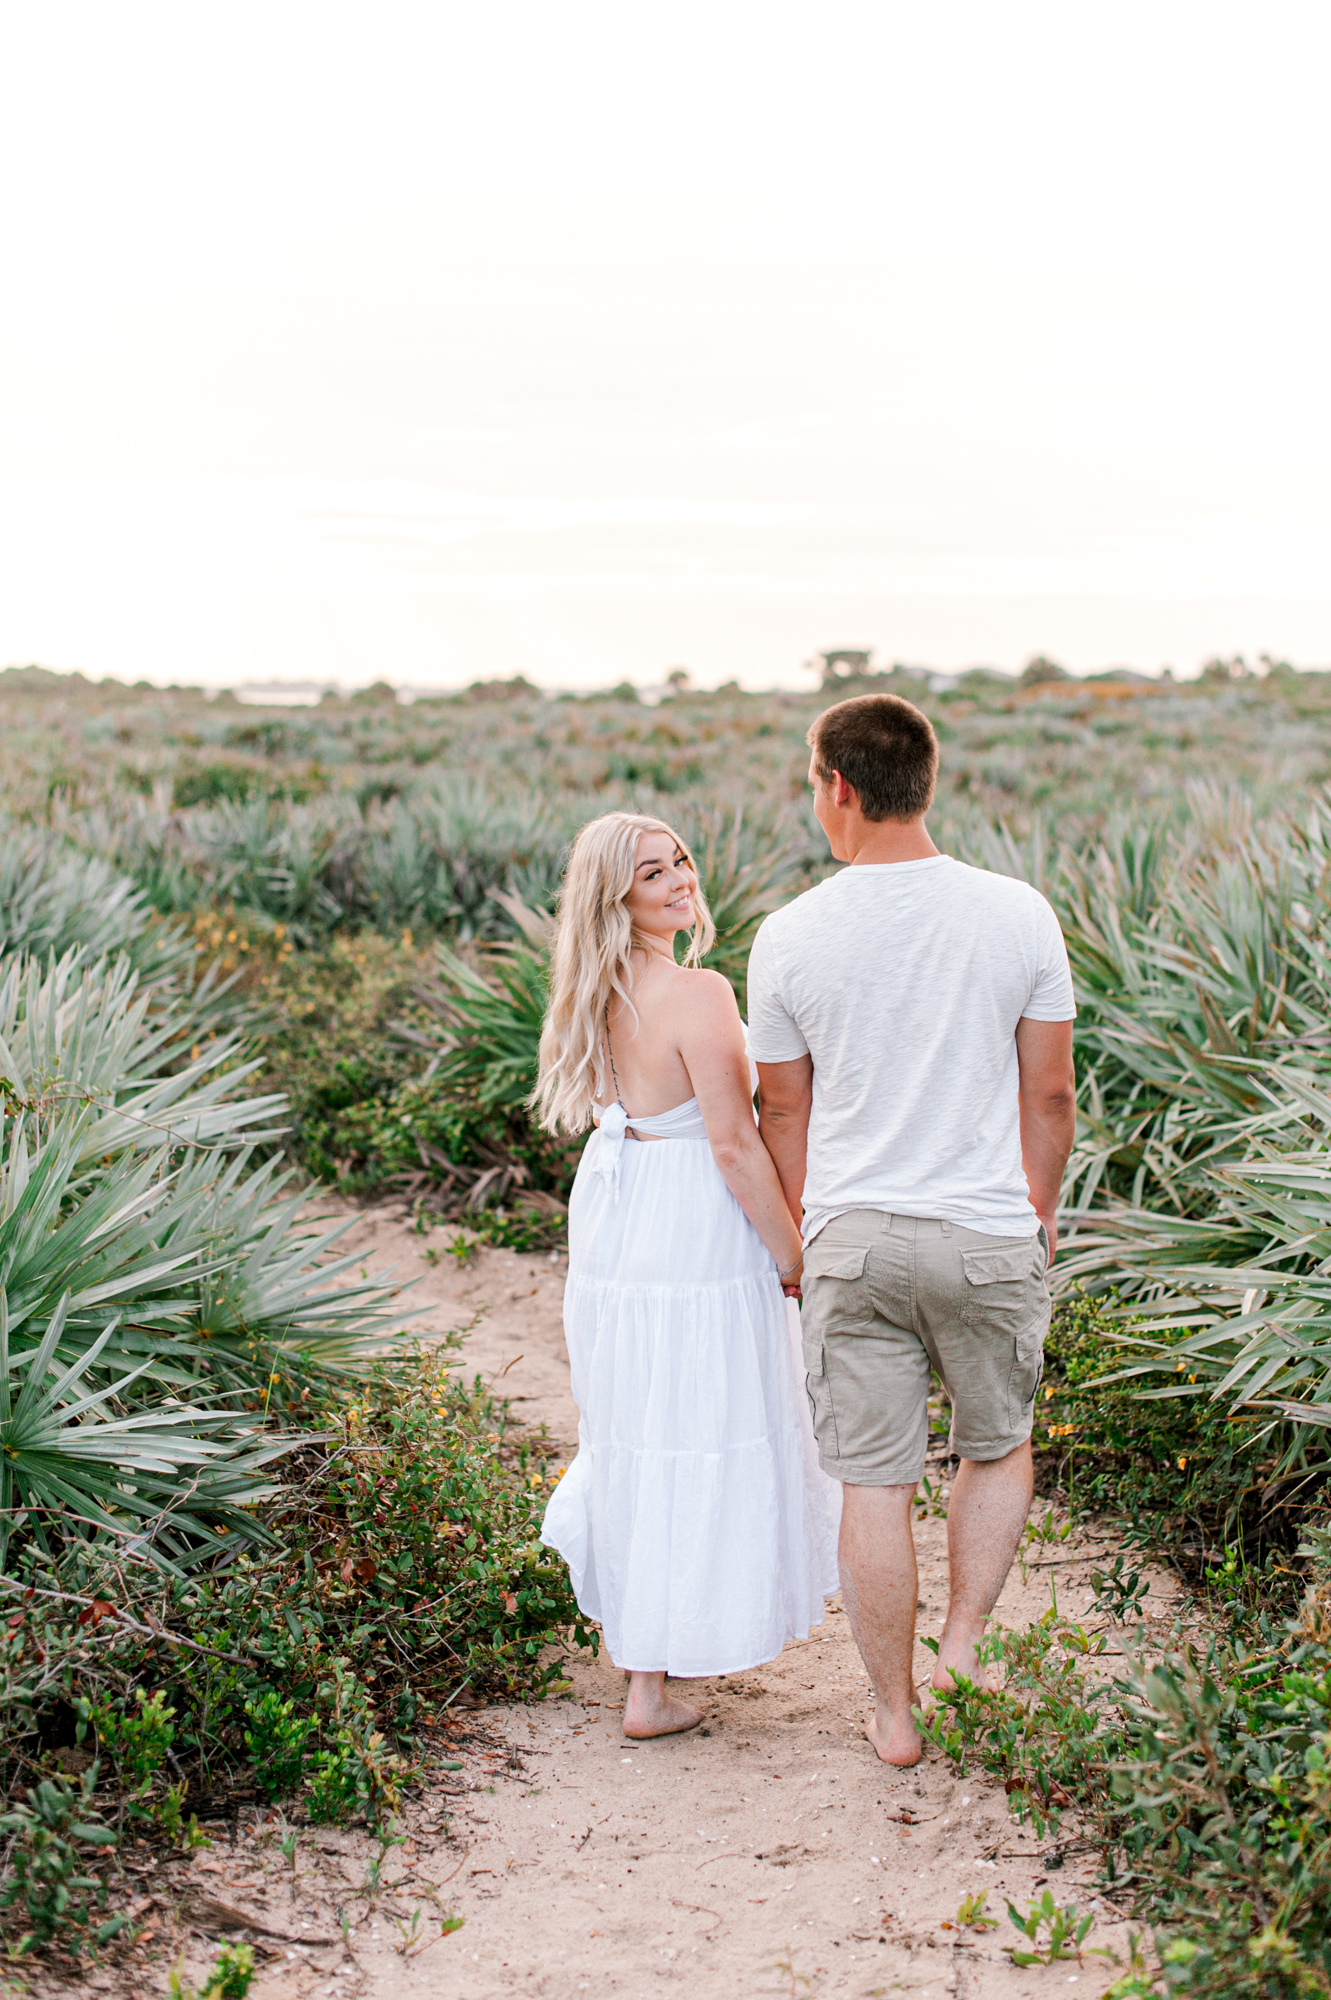 Couple walking through a trail near the beach and girl looks back and smiles at the camera during her engagement session Orlando hair salons